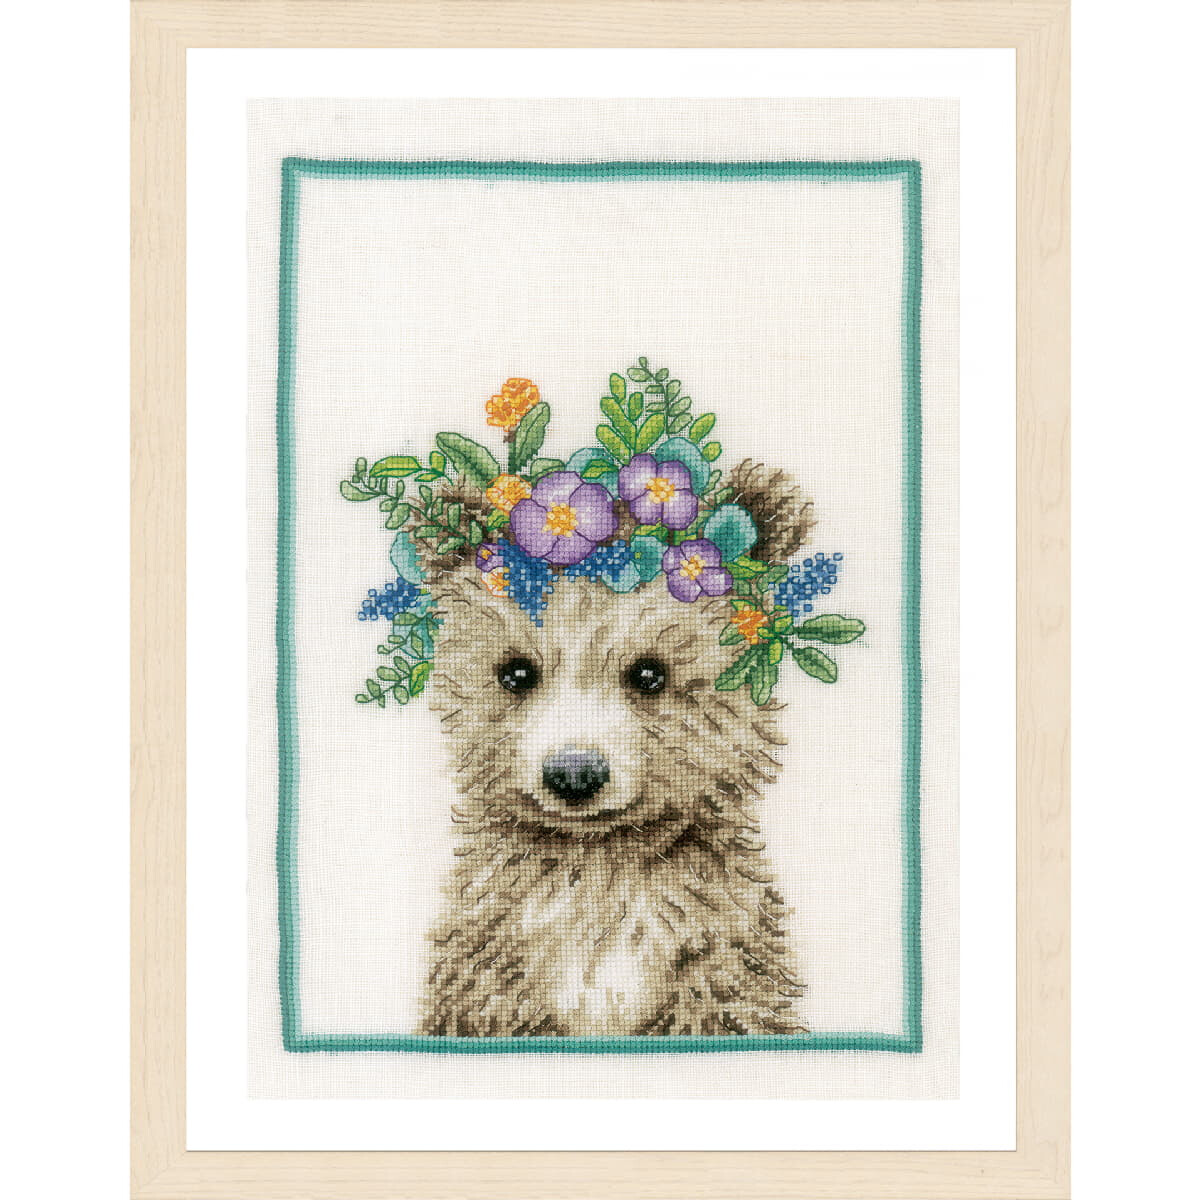 This cross stitch pattern from Lanarte embroidery kit...